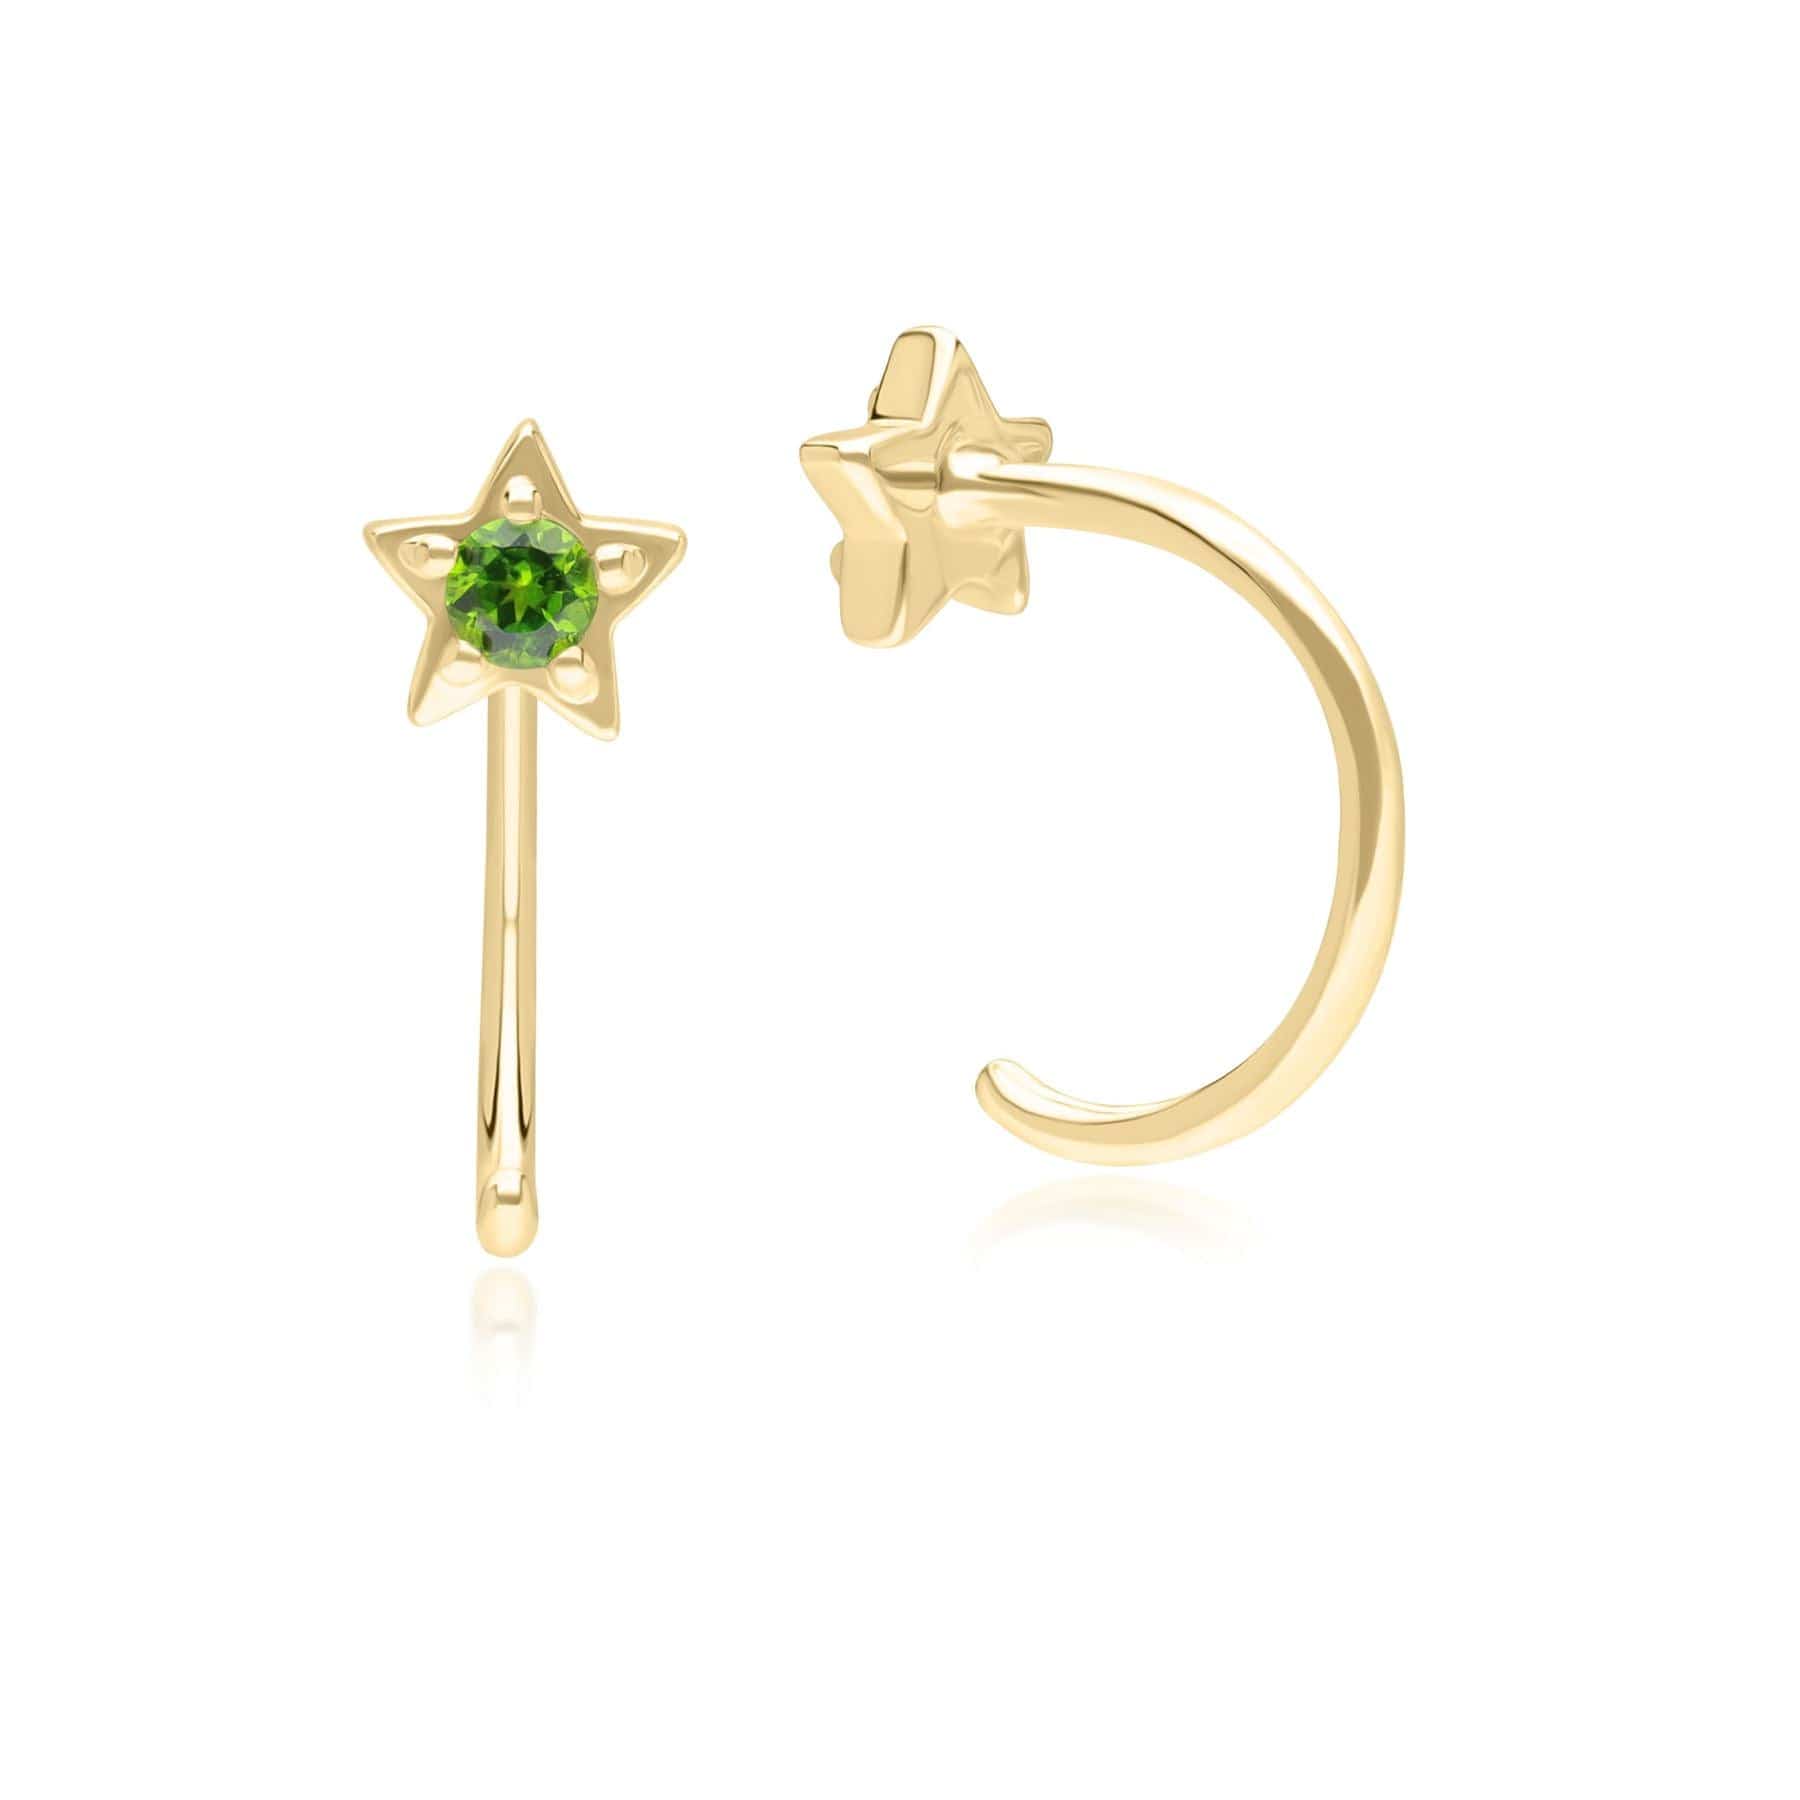 135E1822019 Modern Classic Chrome Diopside Pull Through Hoop Earrings in 9ct Yellow Gold On Model